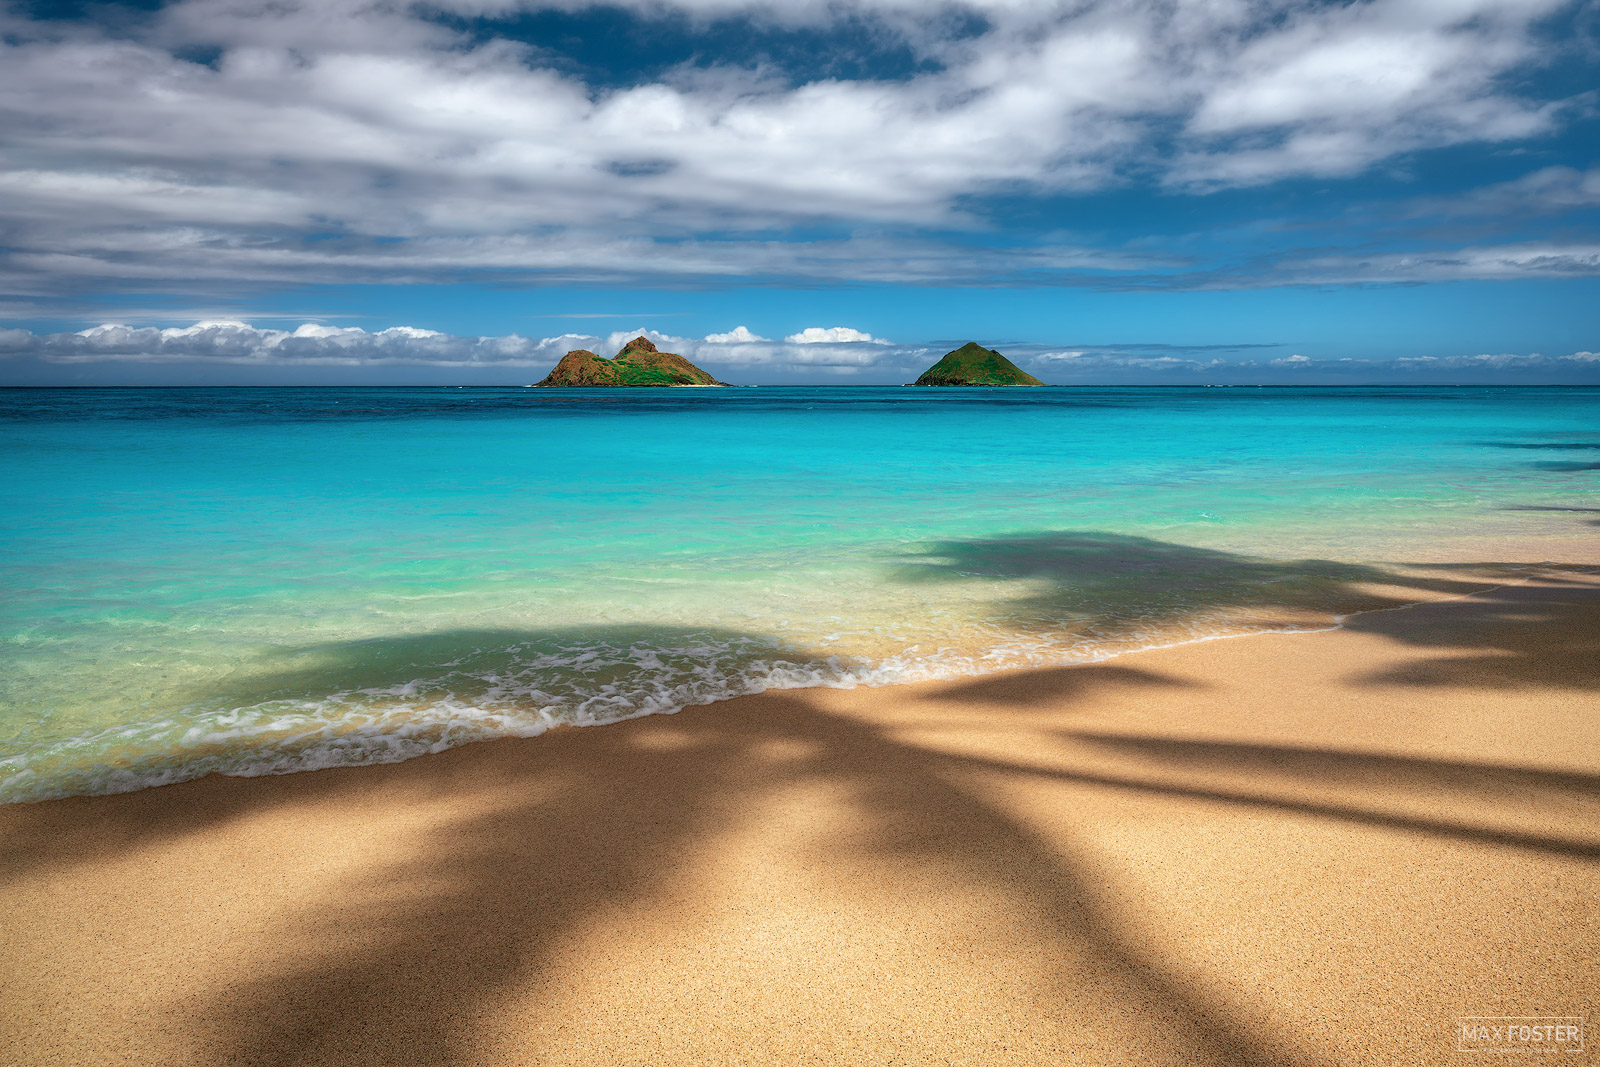 Bring nature into your home with Palm Trees & Daydreams, Max Foster's limited edition photography print of Lanikai Beach, Oahu...